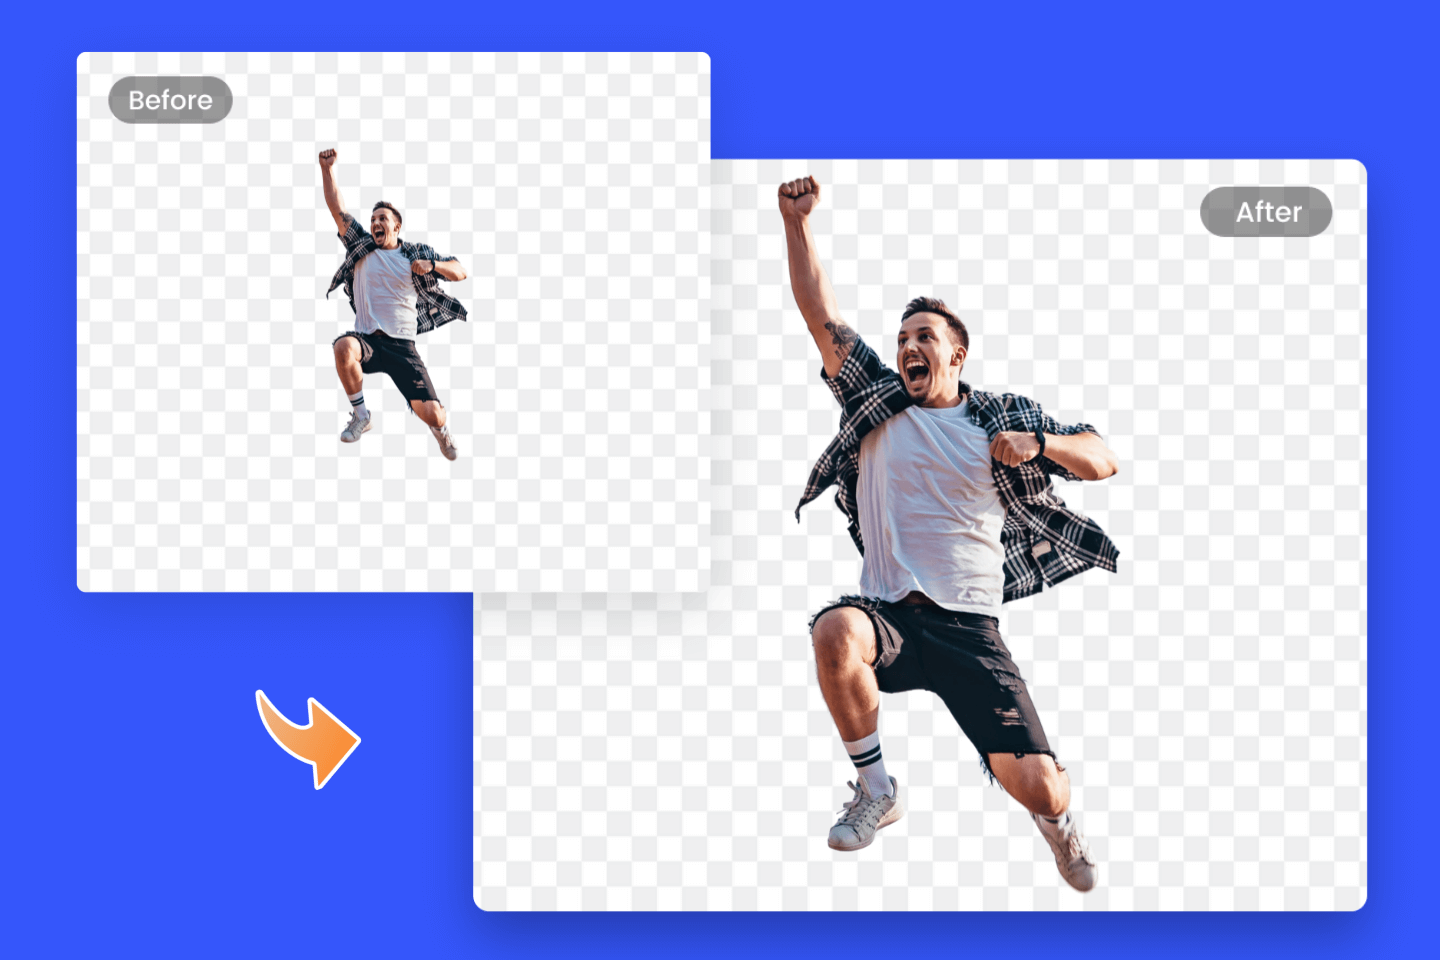 Make a jumping man bigger and clearer by cropping image